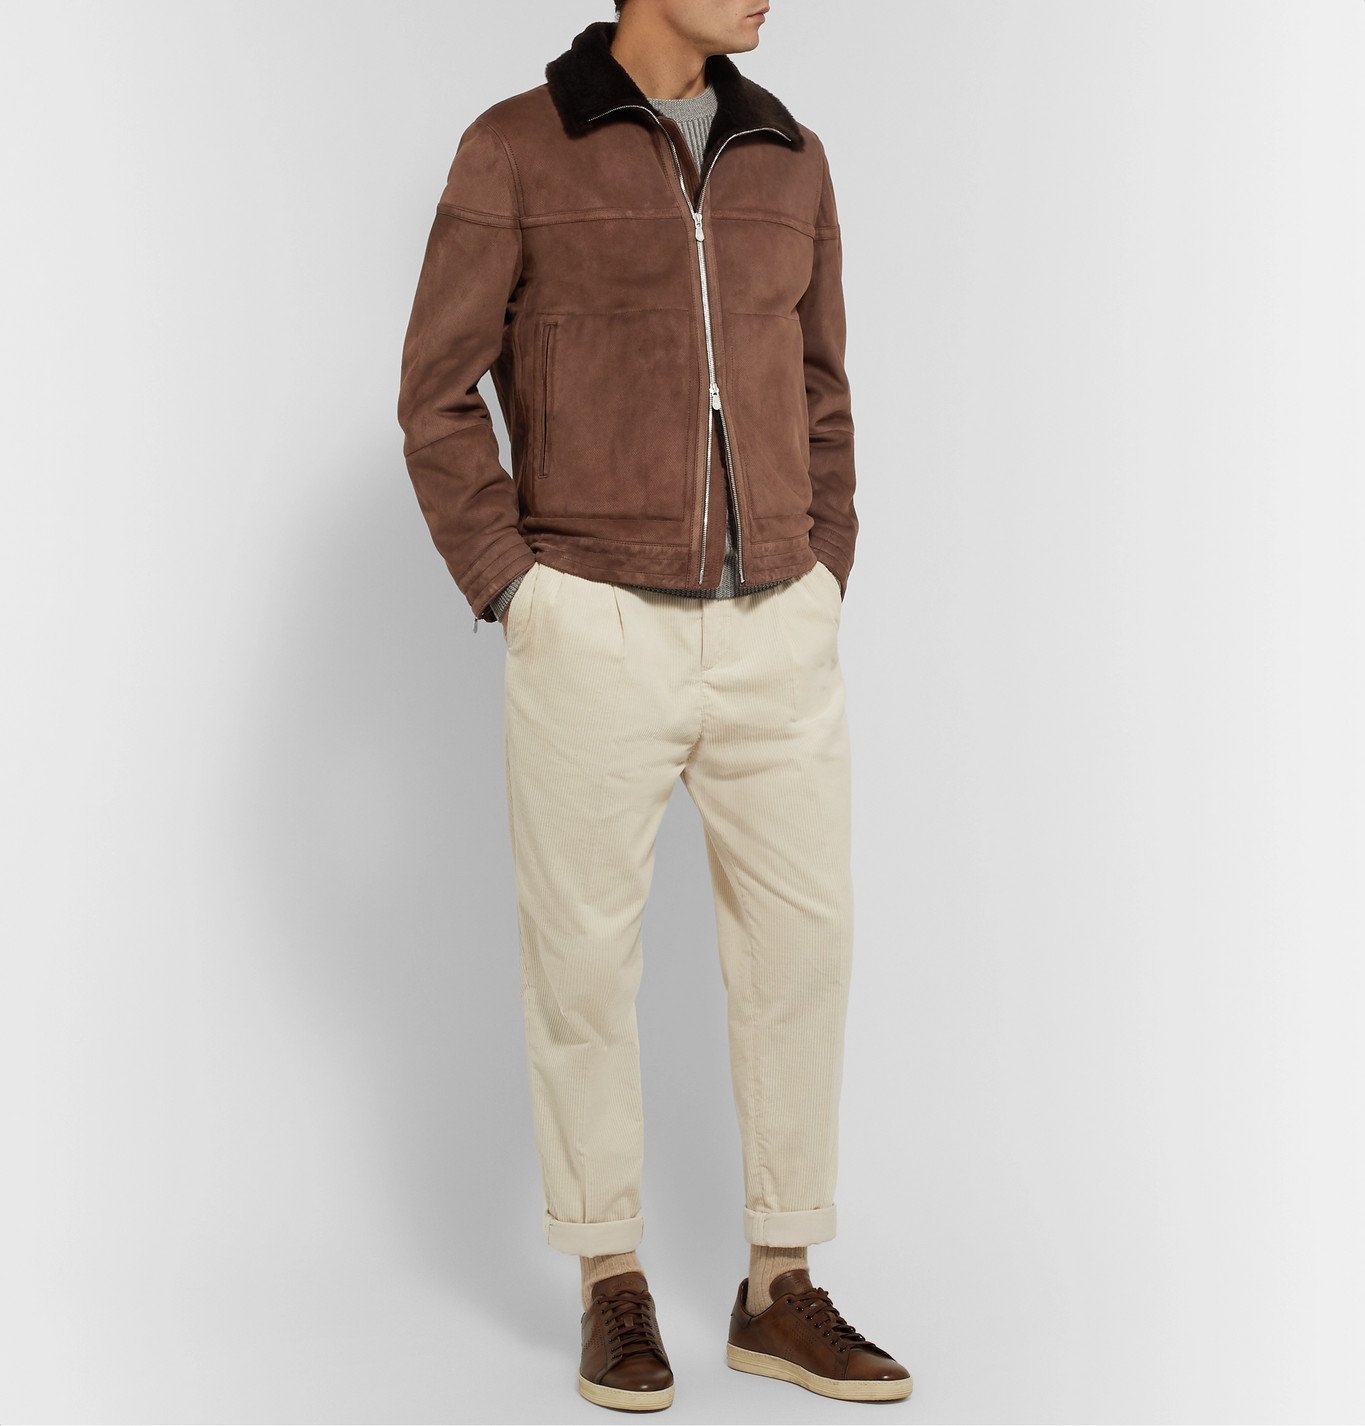 Brunello Cucinelli - Shearling-Lined Perforated-Suede Jacket - Brown ...